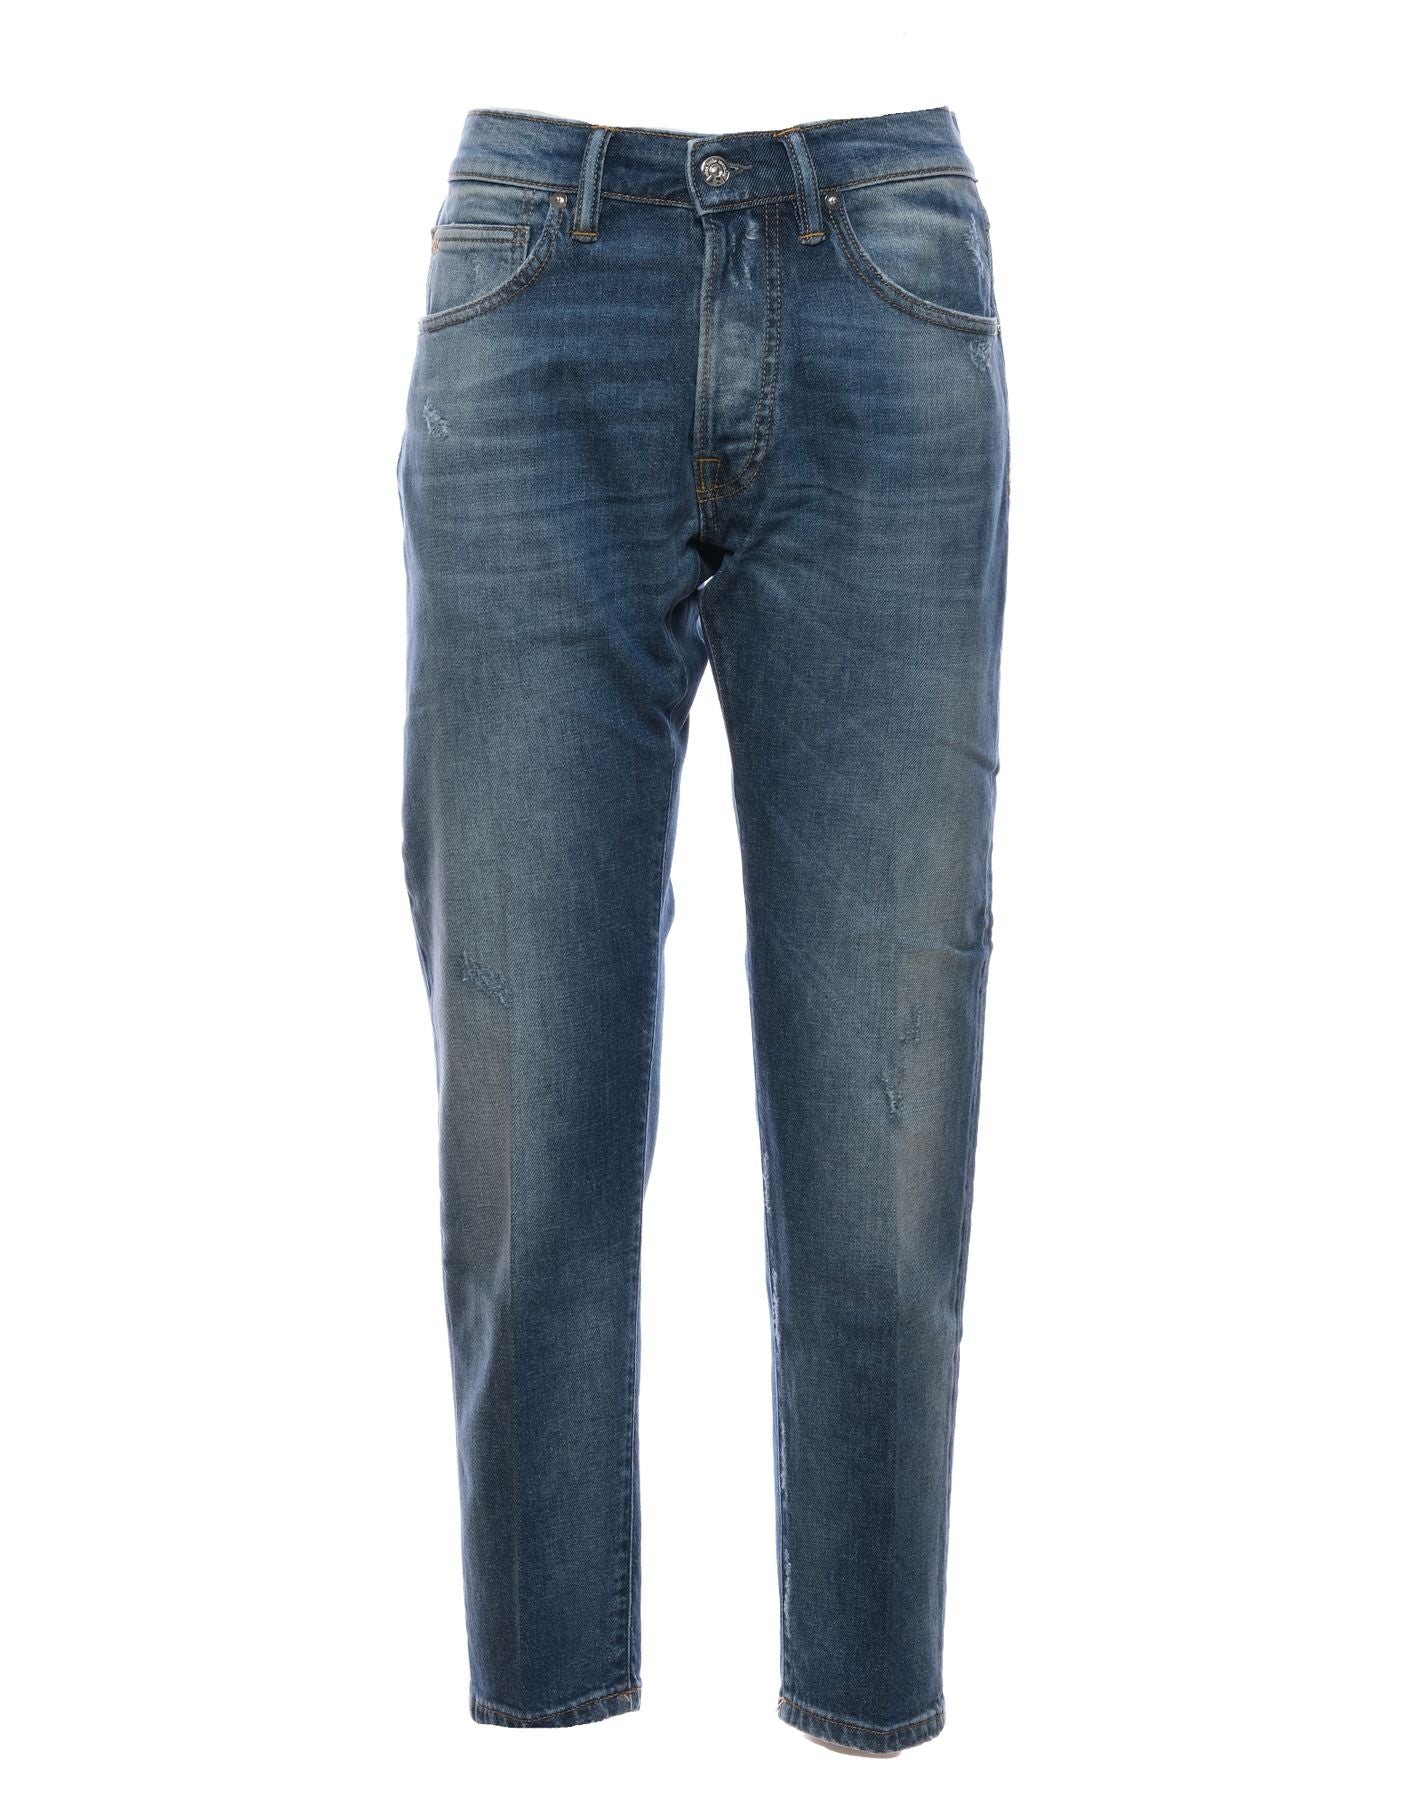 Jeans for man ROCK RK119 DLL9321 NINE:INTHE:MORNING